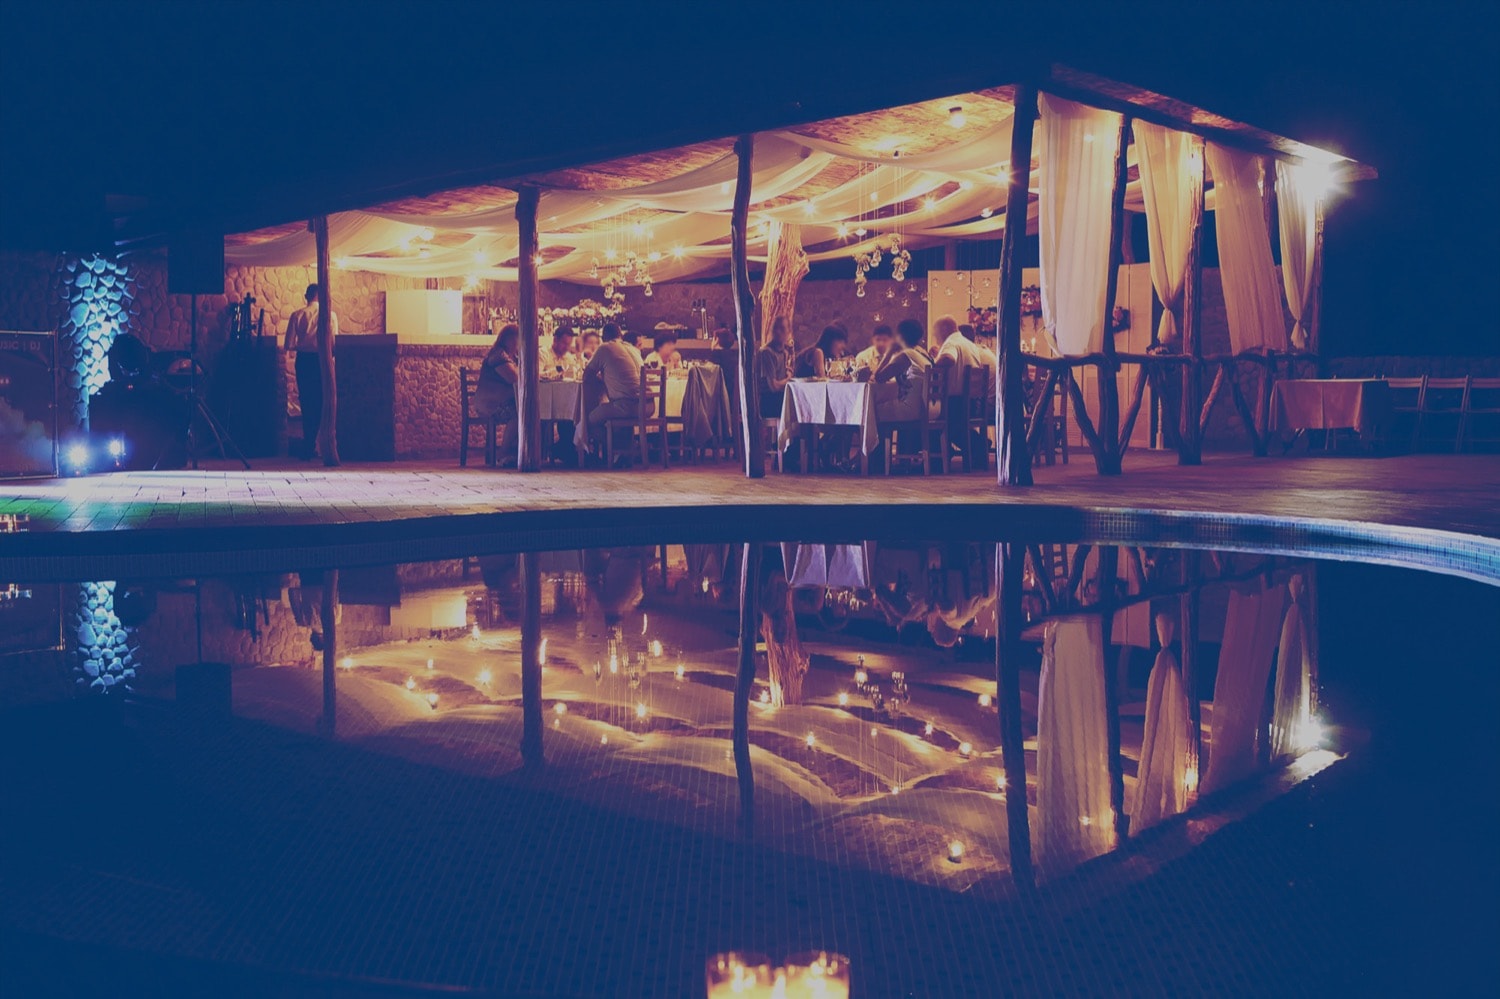 A large group of people eating a meal at night in an outdoor restaurant, next to a pool. 